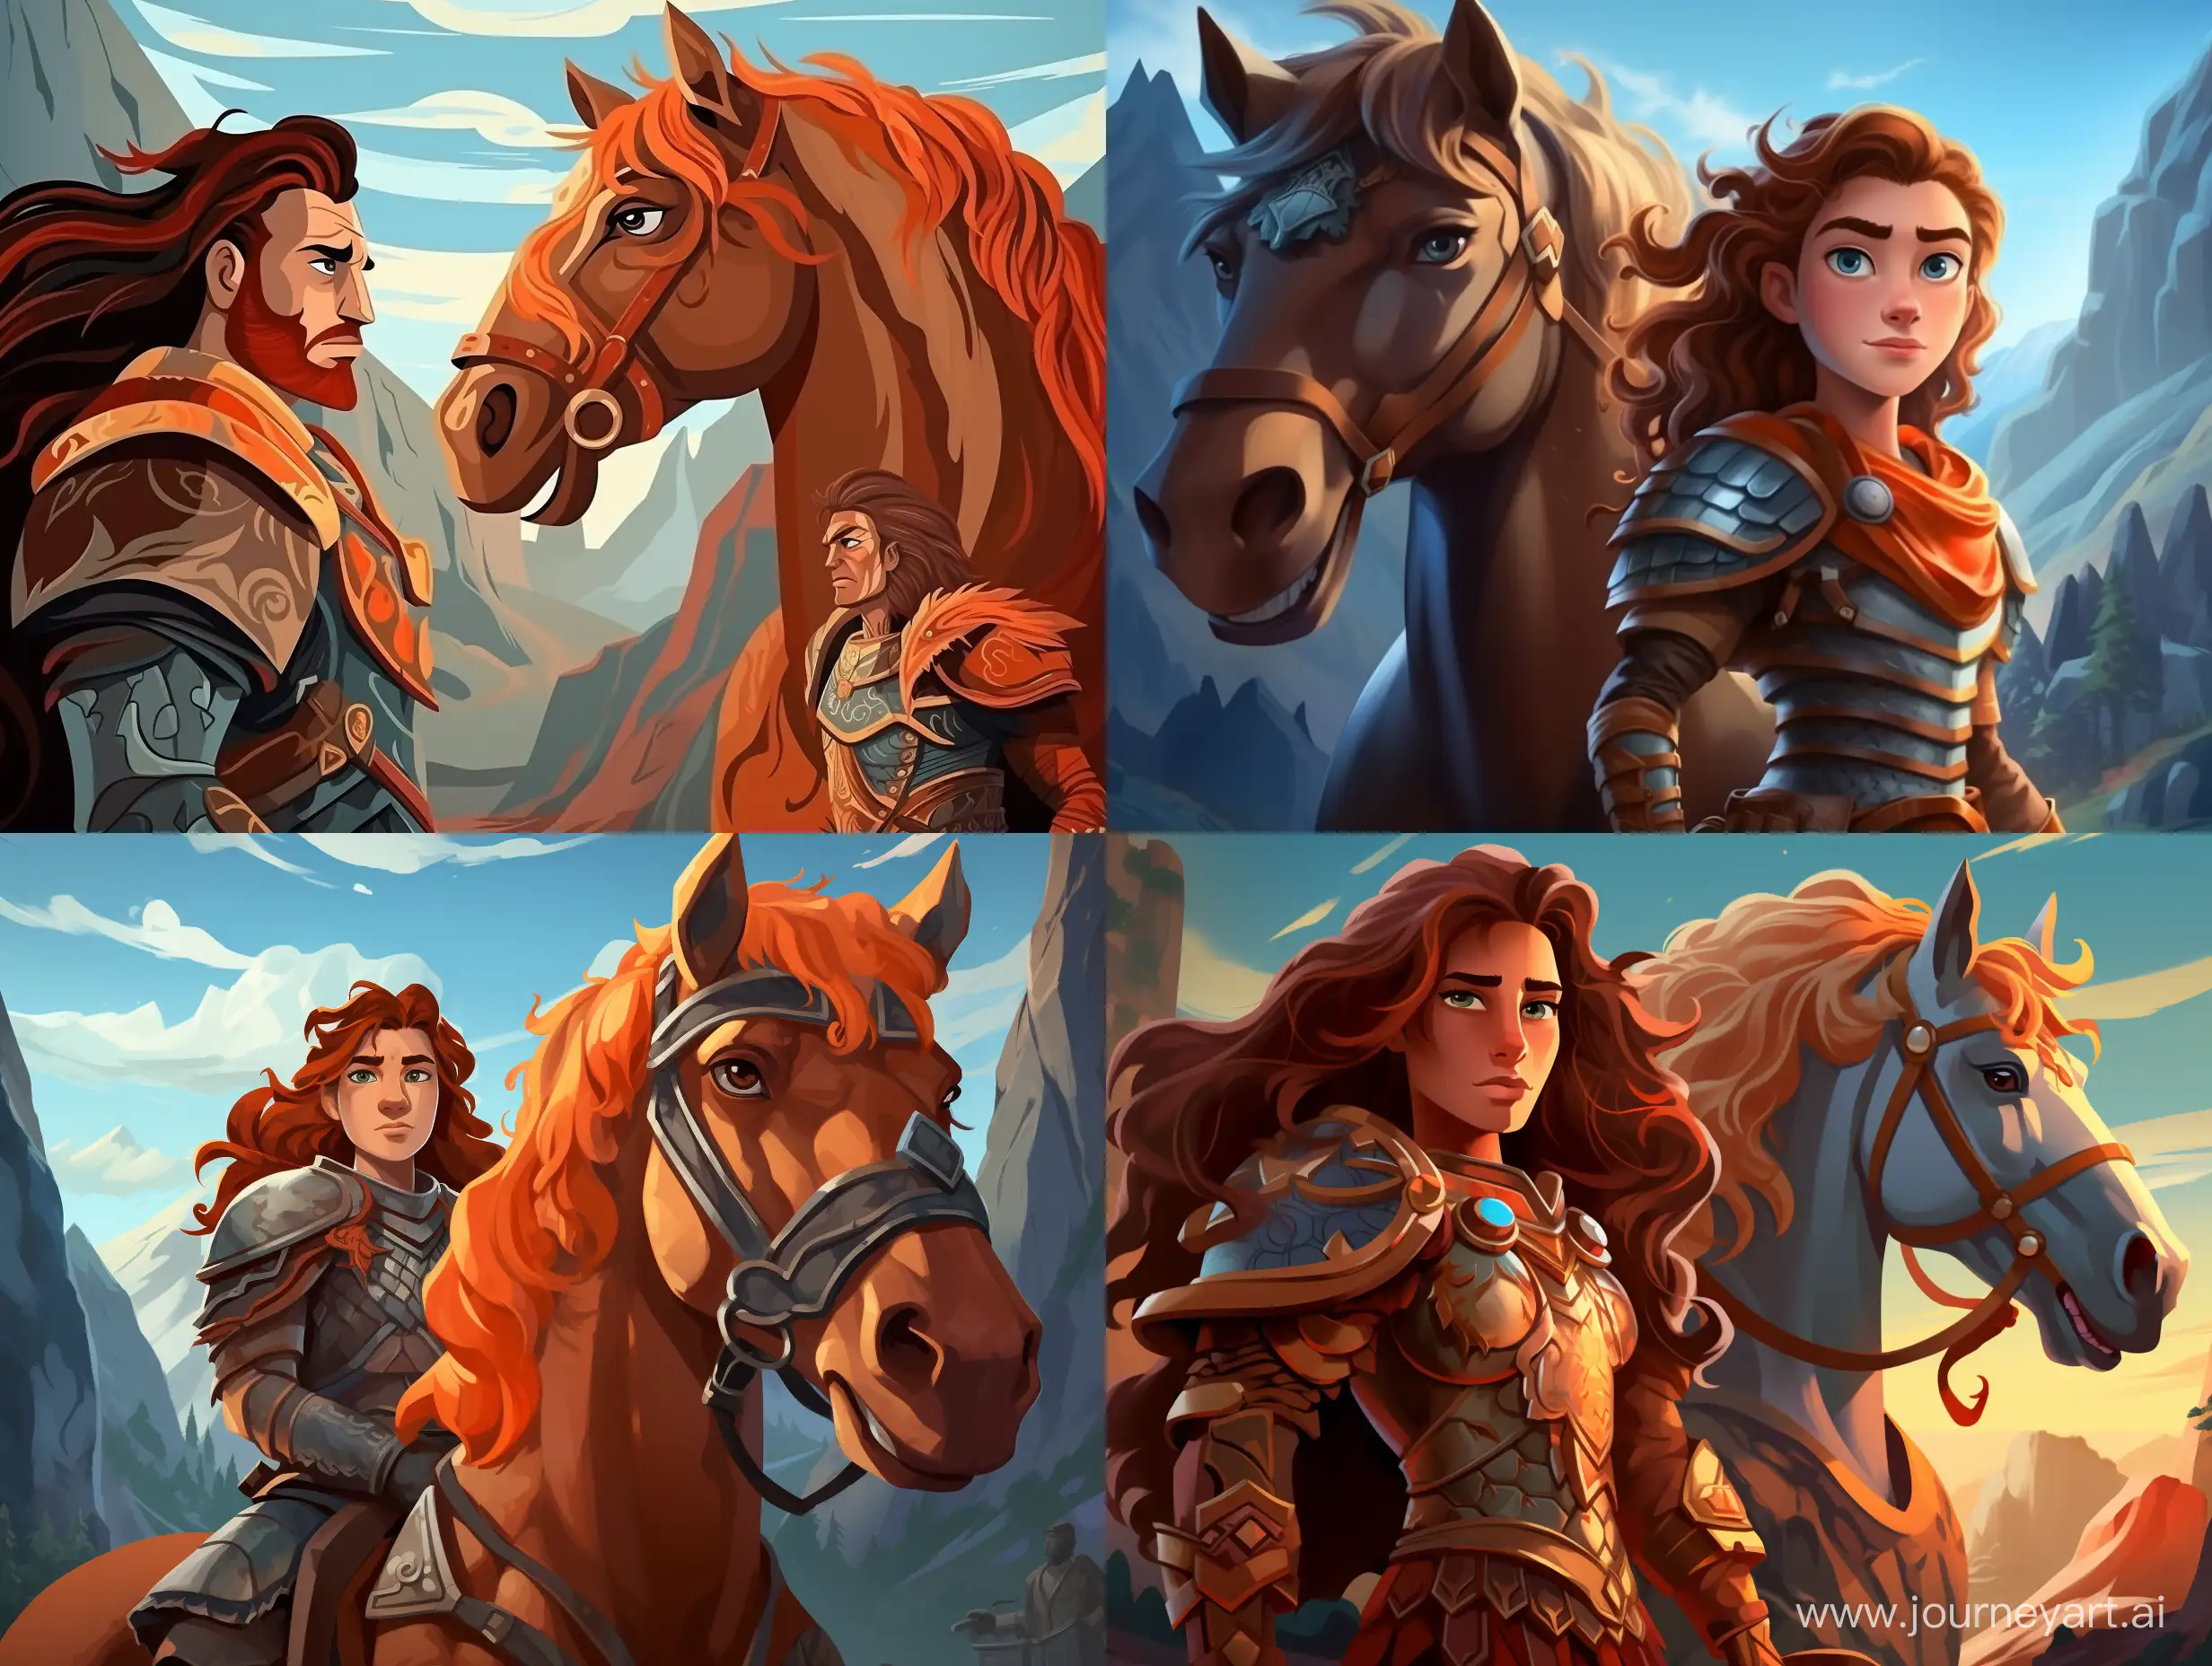 Courageous-Warrior-and-Loyal-Steed-in-PixarStyle-Mountain-Portrait